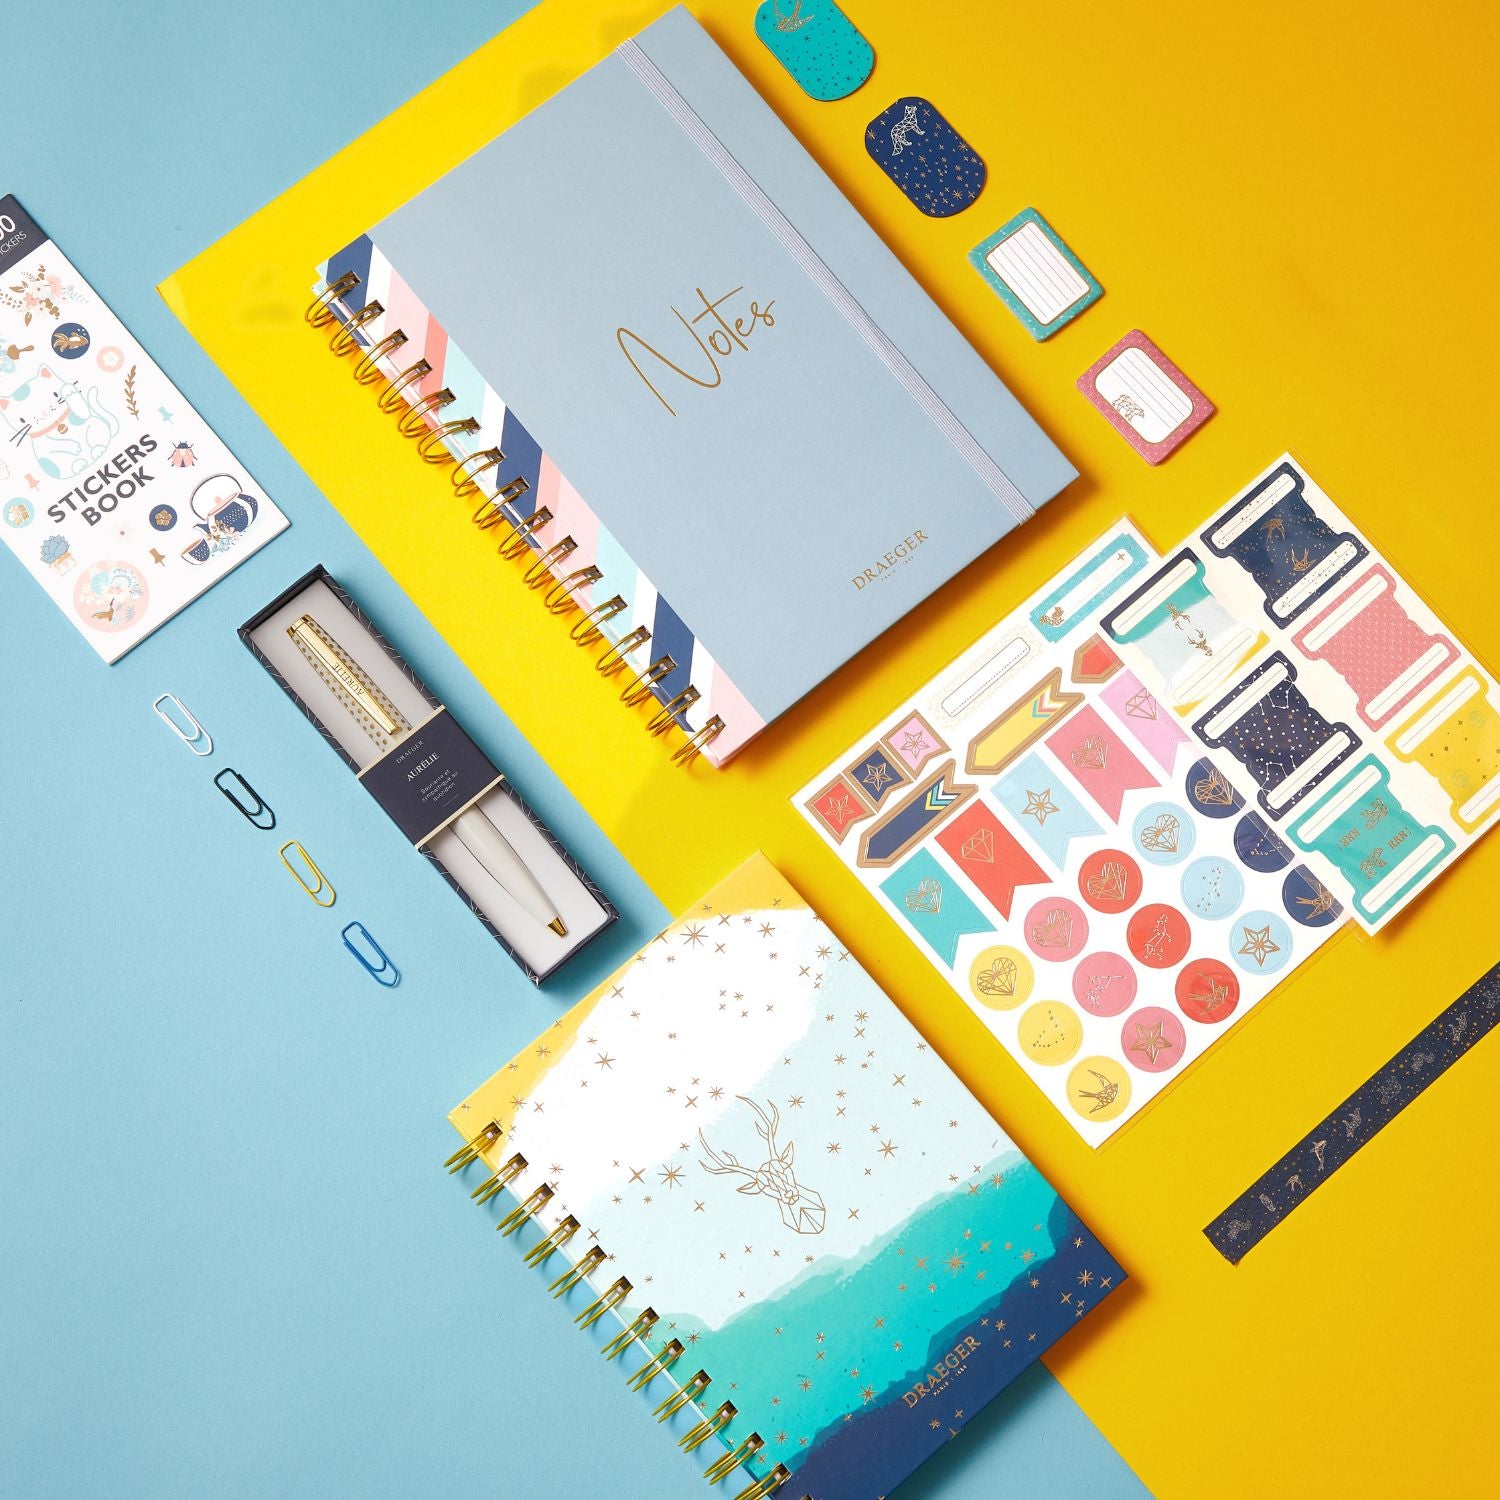 Stationery: Bullet Journal, Accessories